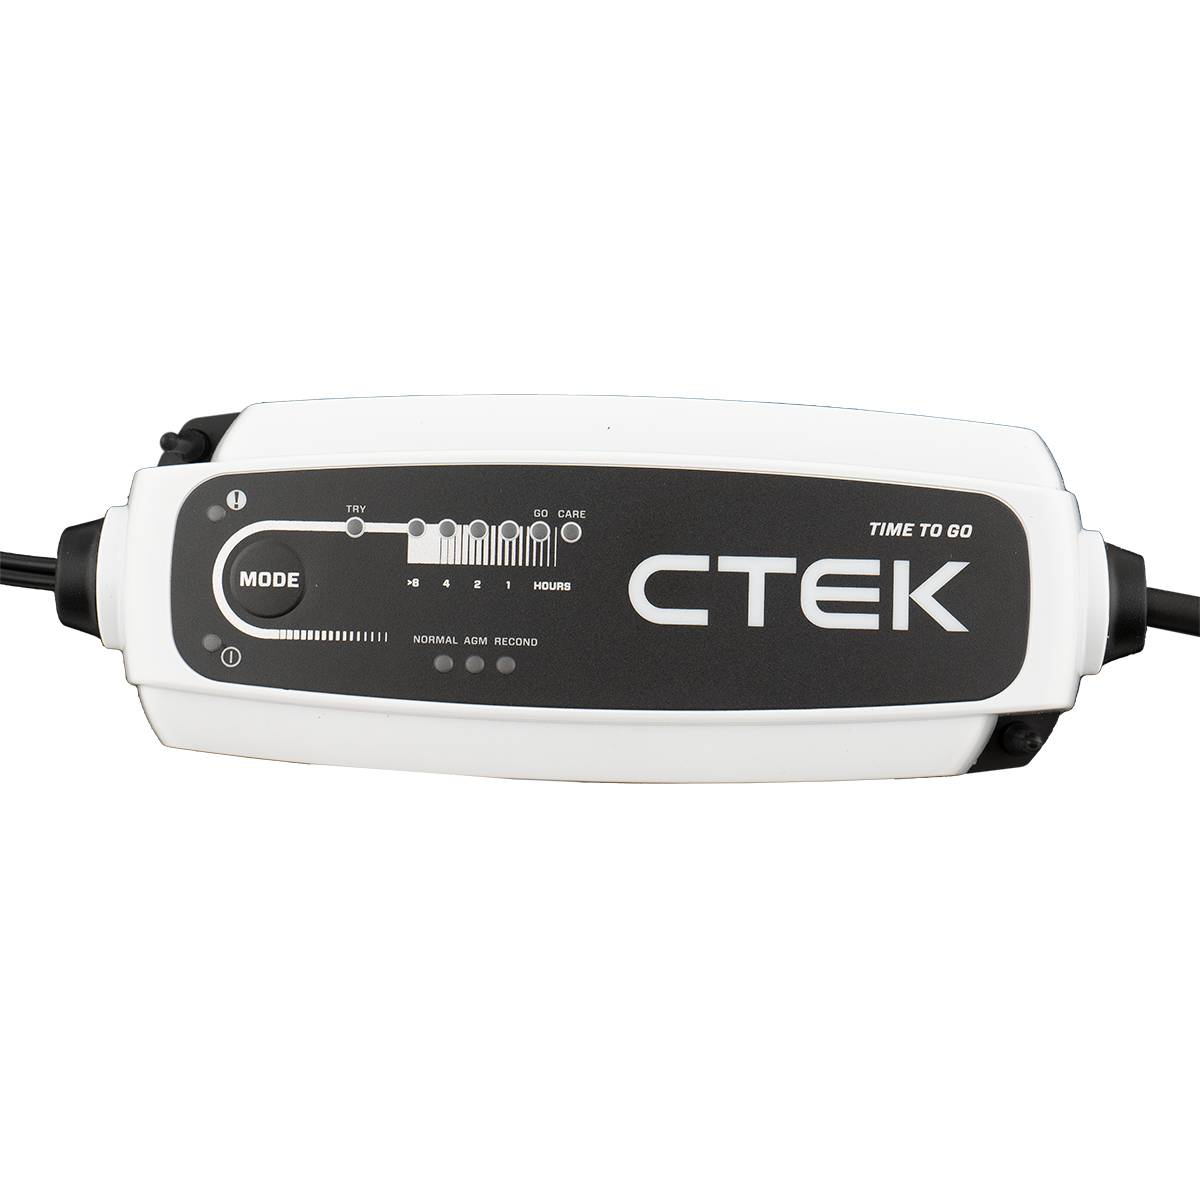 CTEK CT5 TIME TO GO EU charger for 12V AGM batteries, Chargers, Boots &  Marine, Batteries by application